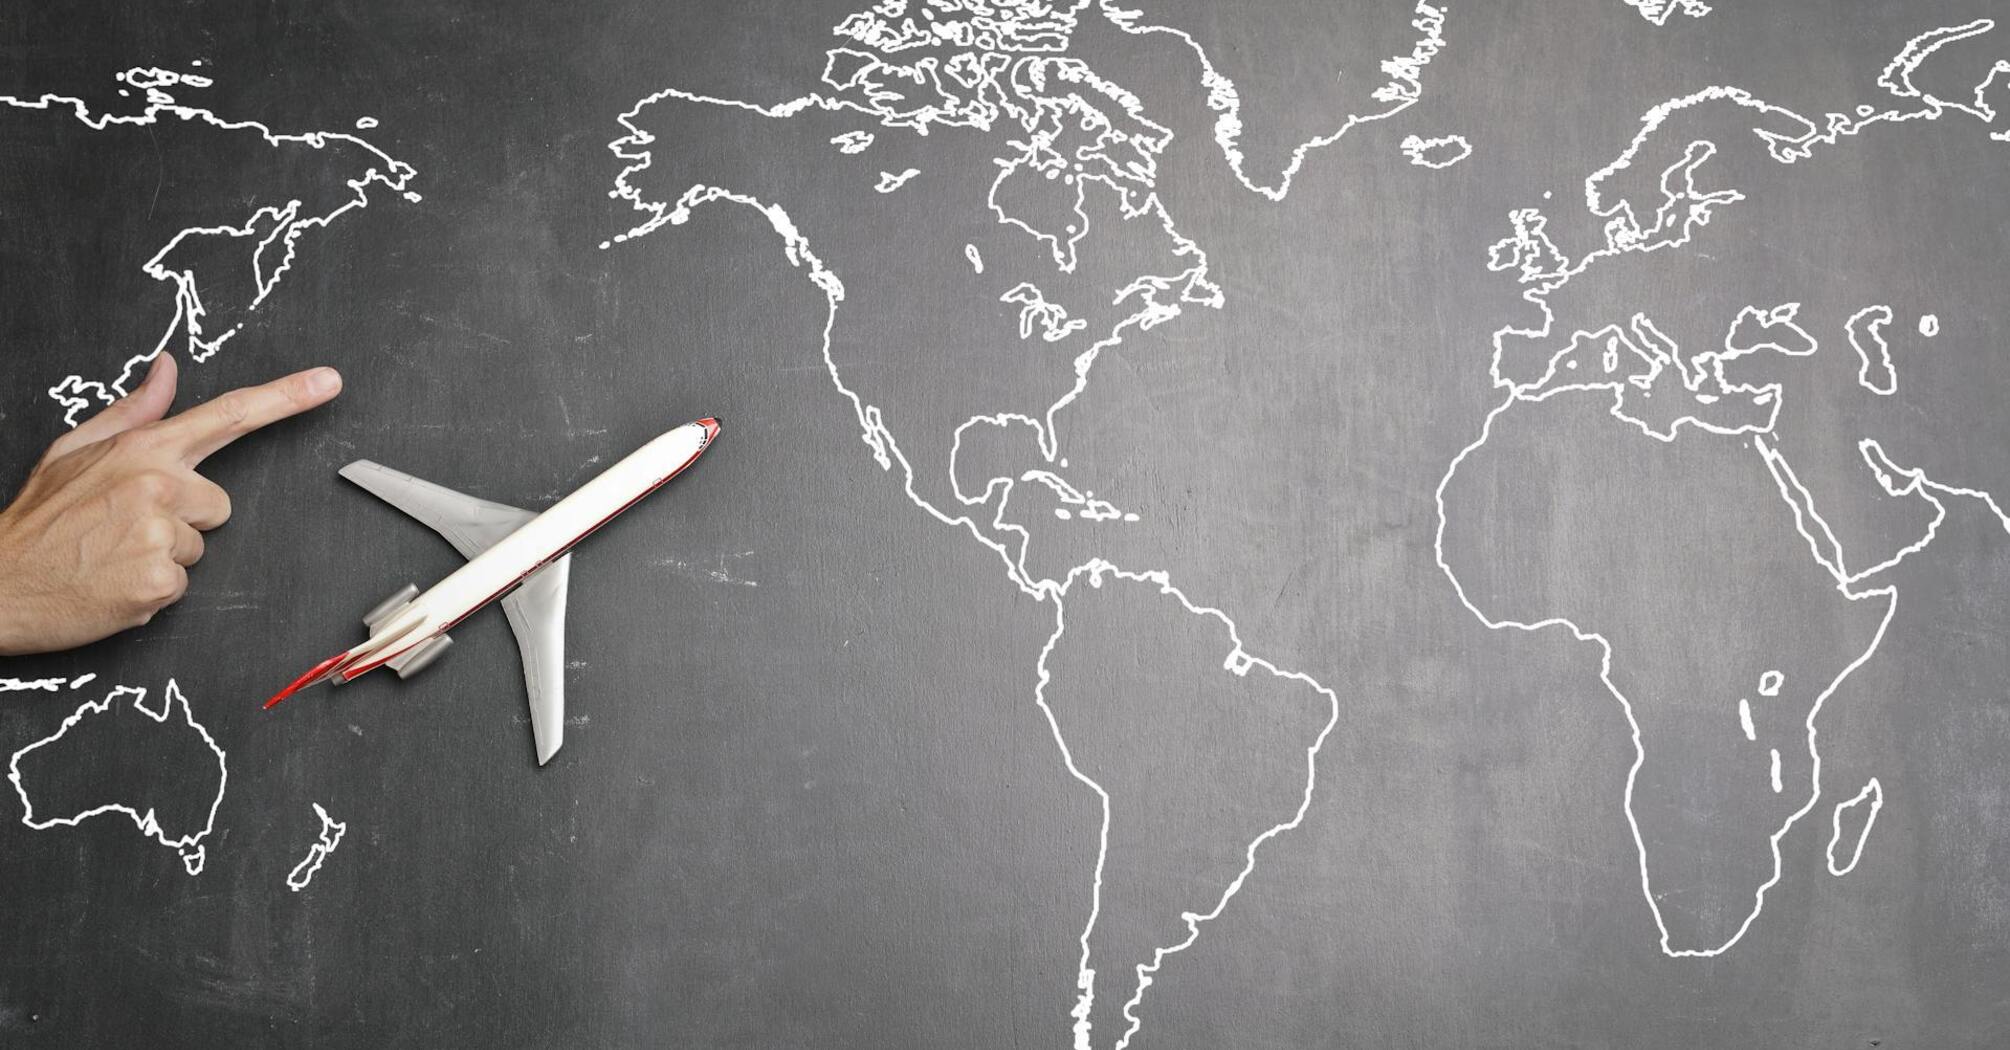 A person's hand pointing at a chalk-drawn world map on a blackboard, with a model airplane placed on the board